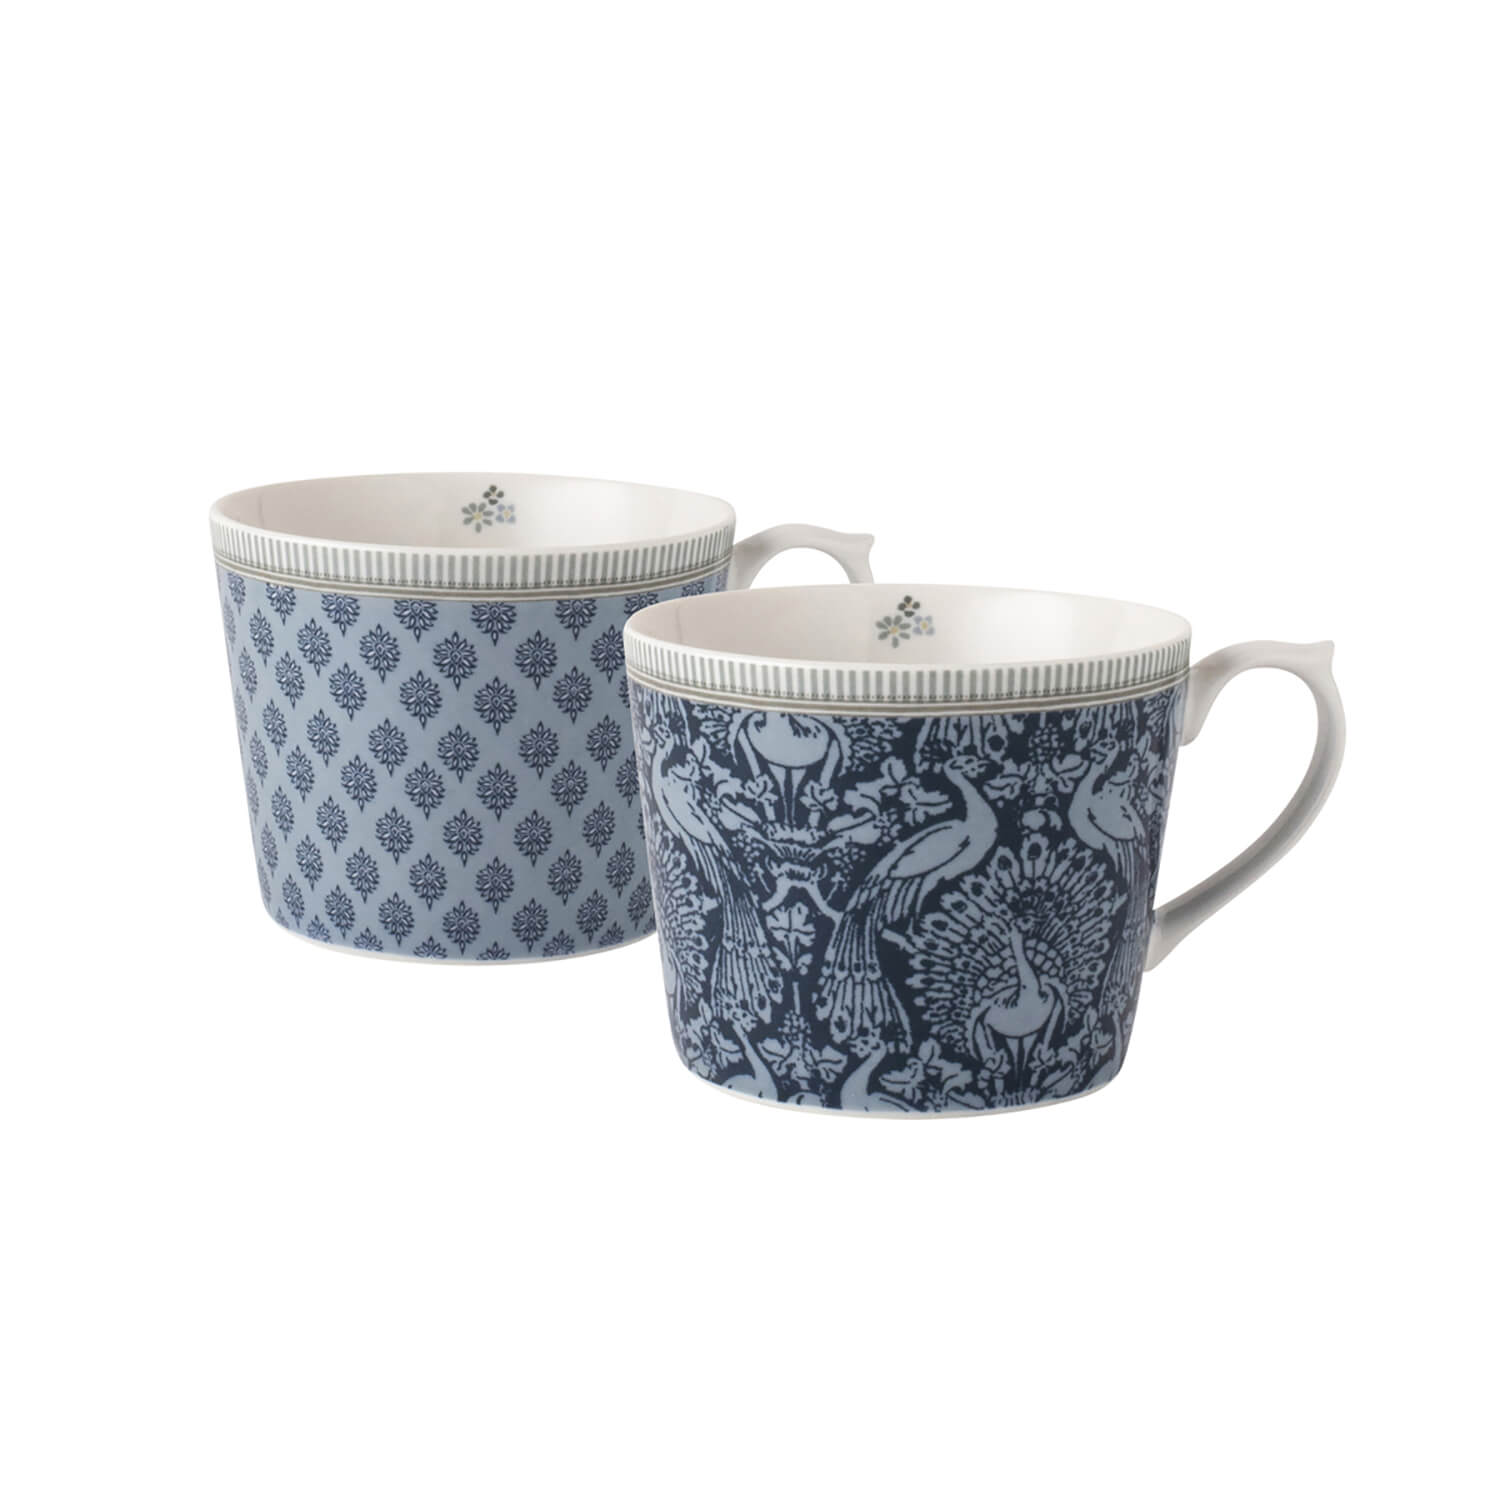 Laura Ashley Tea Collectables Set of 2 Mugs - 30cl 2 Shaws Department Stores